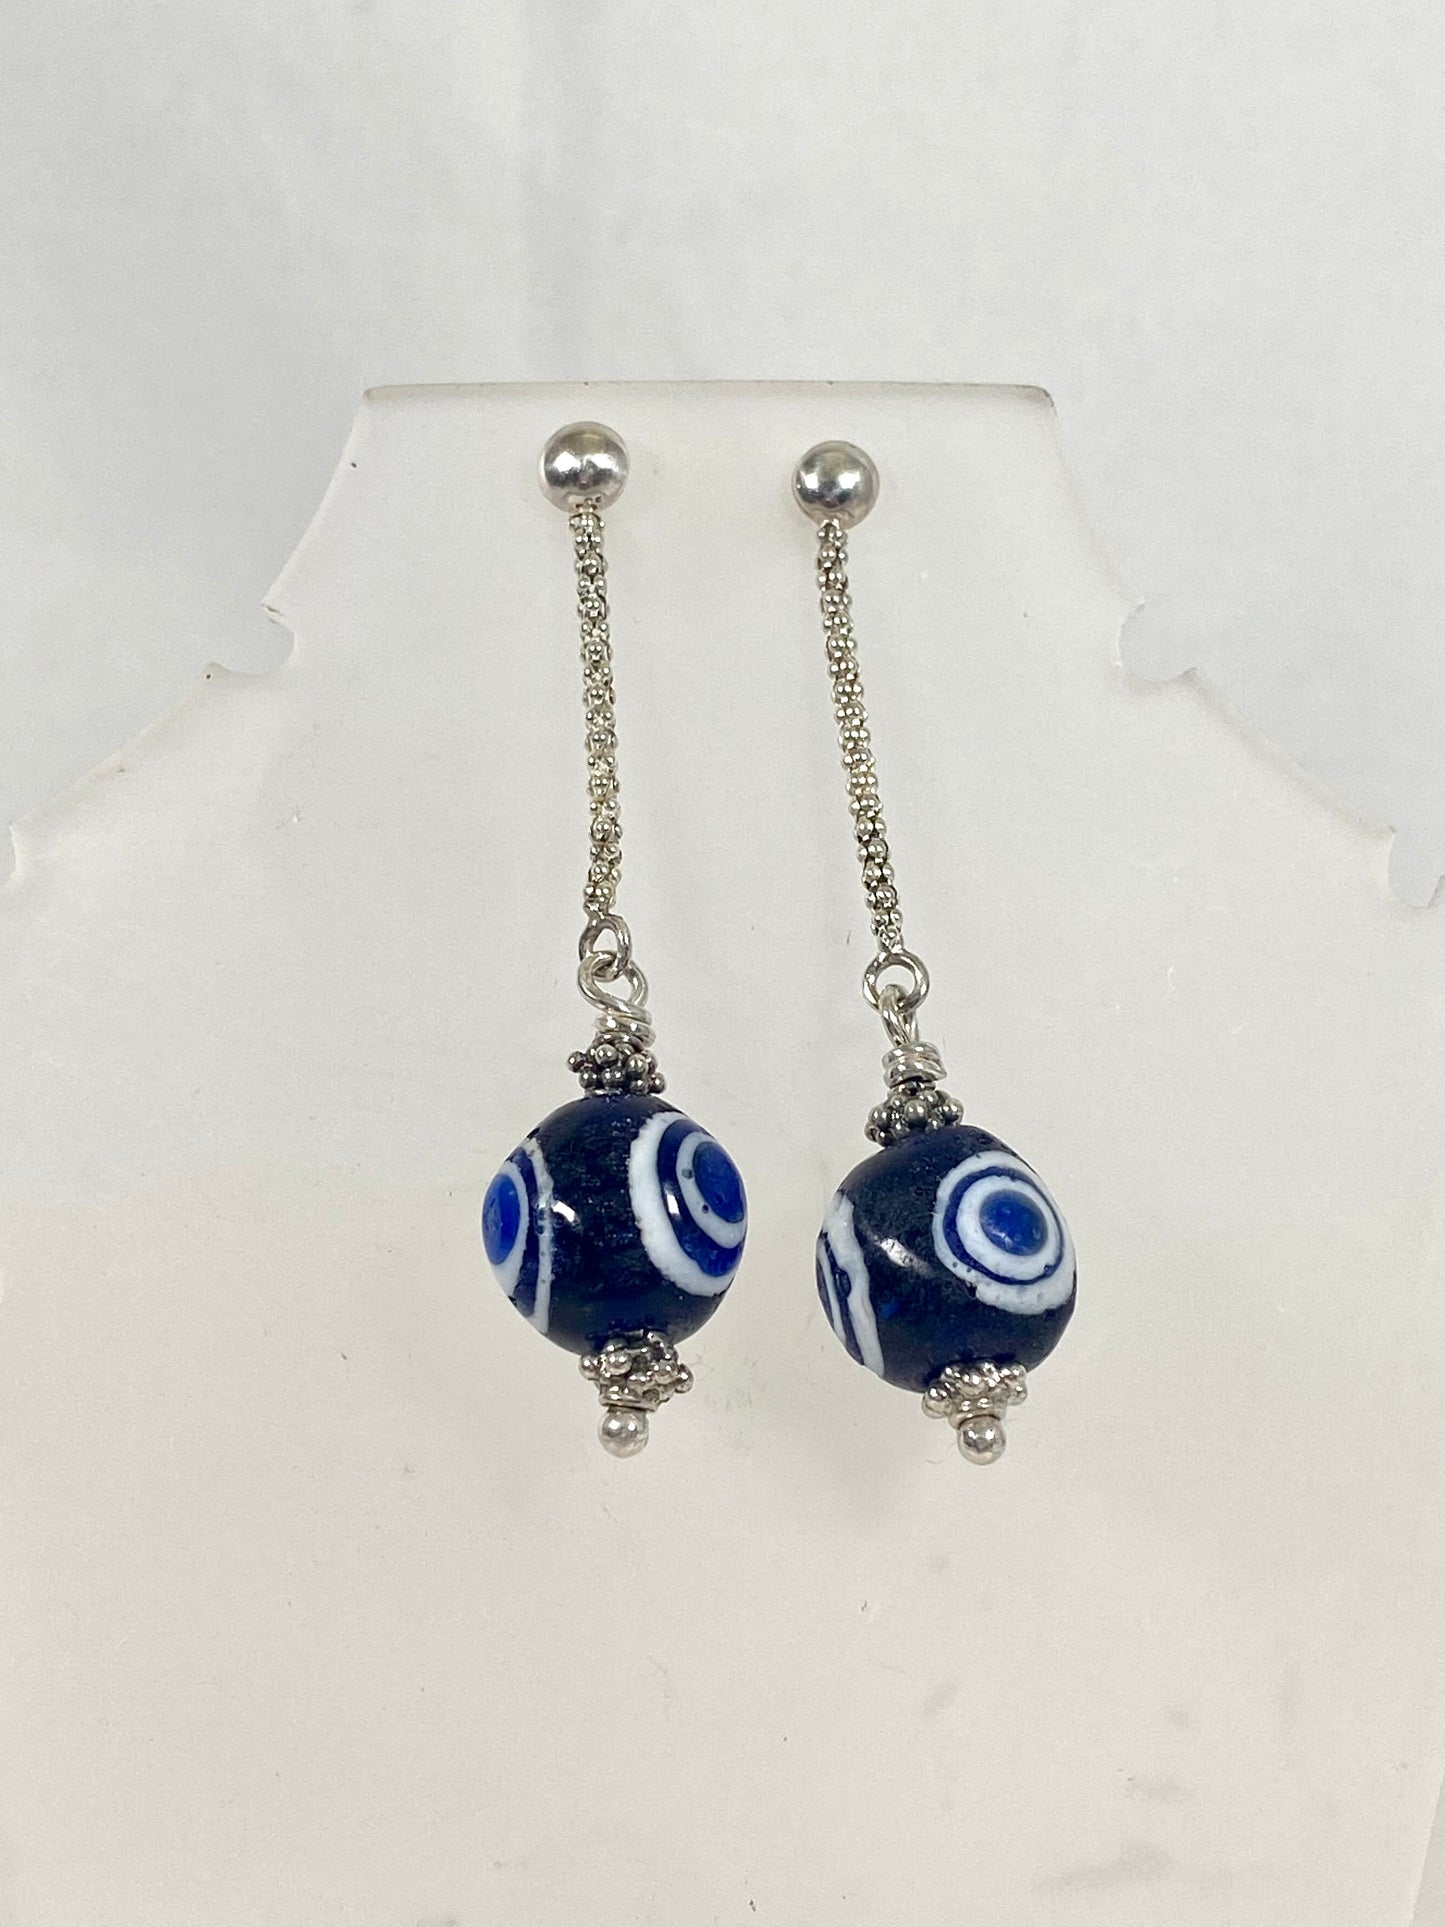 Ancient / Antique Javanese Trade Beads- Millefiori Eye Bead Earrings circa 10th to 14th century set in Sterling Silver